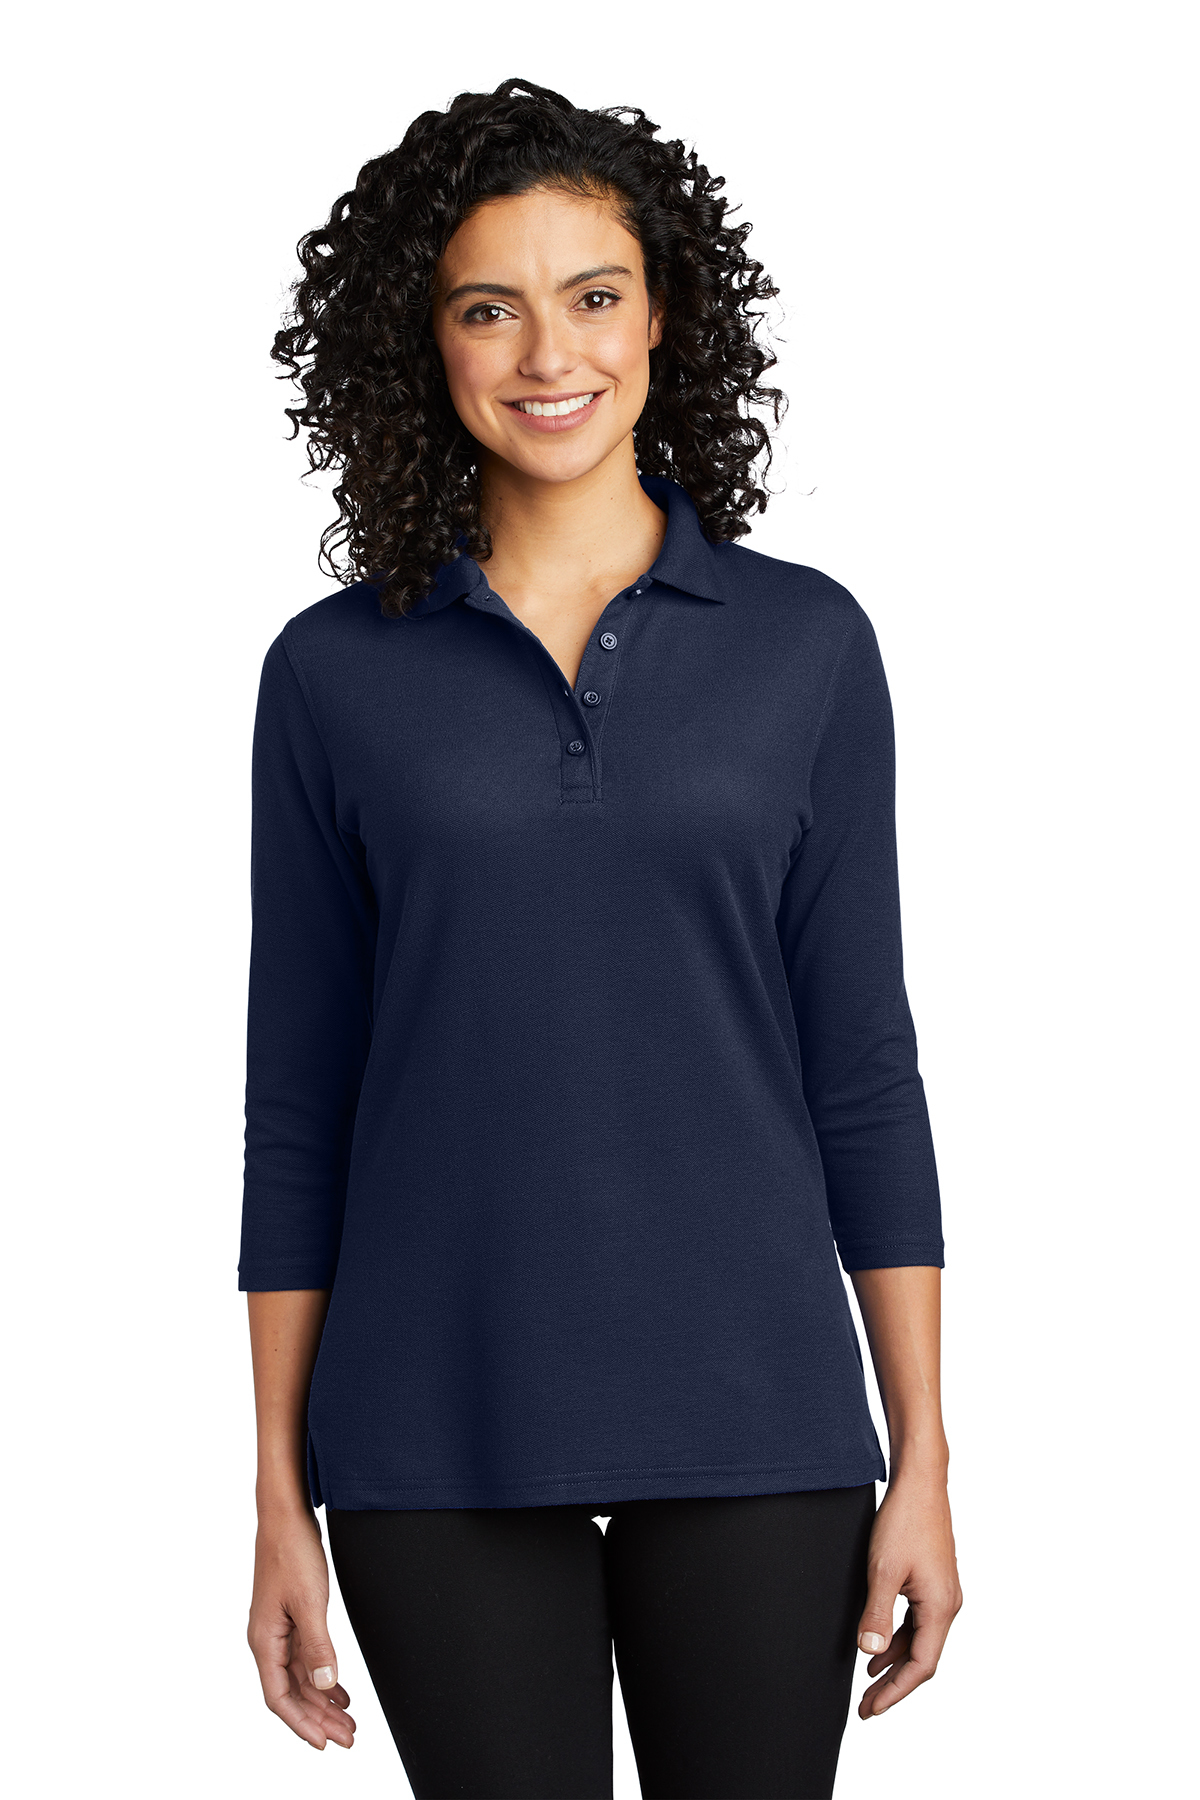 Port Authority Ladies Silk Touch™ 3/4-Sleeve Polo | Product | Company ...